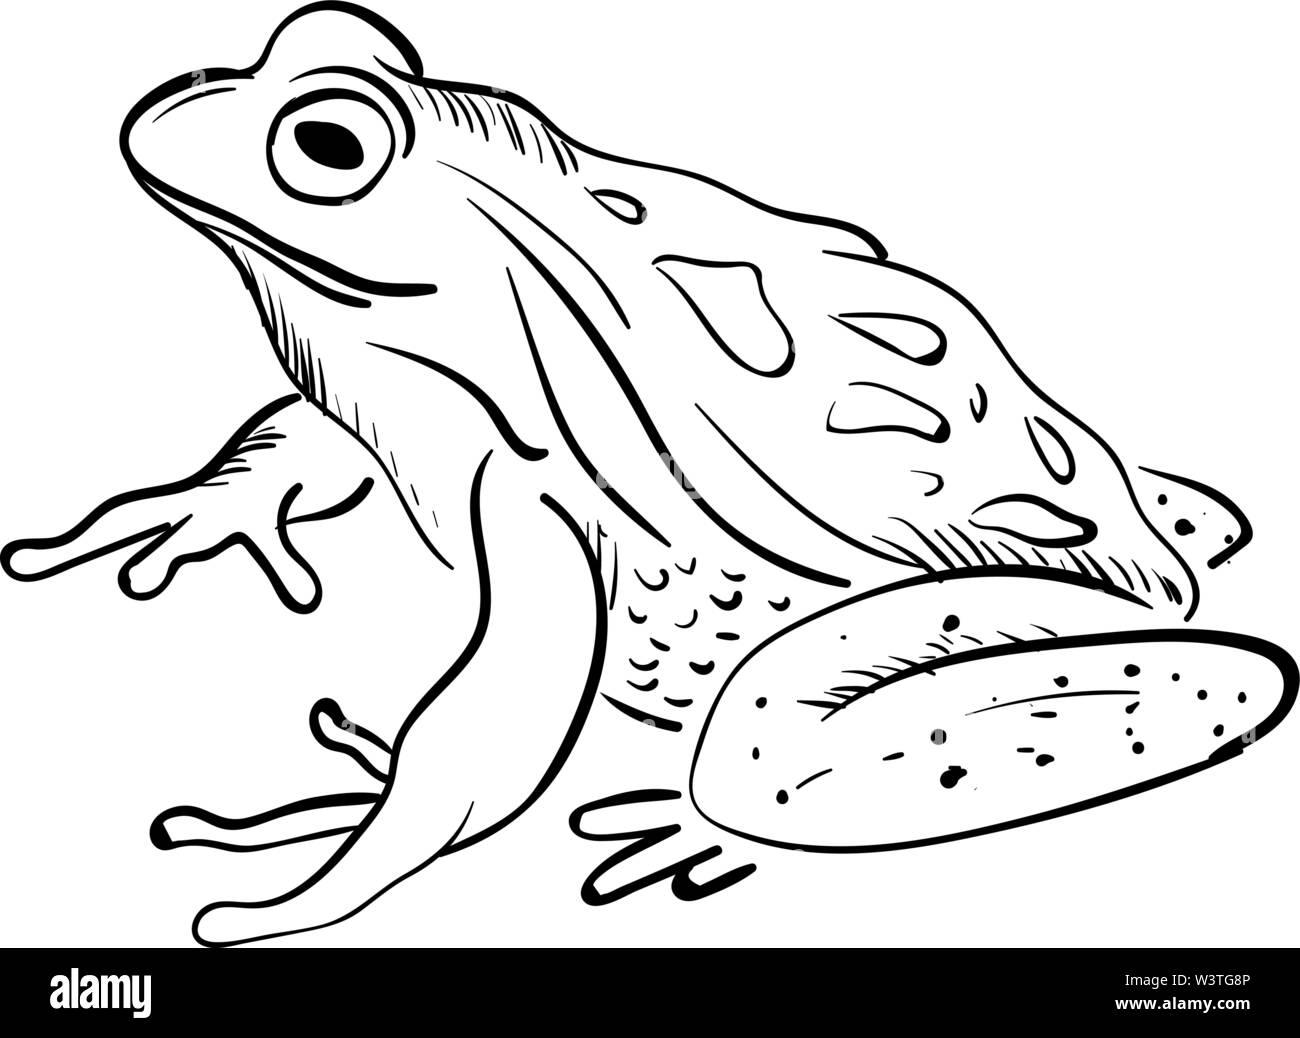 How to Draw a Realistic Frog